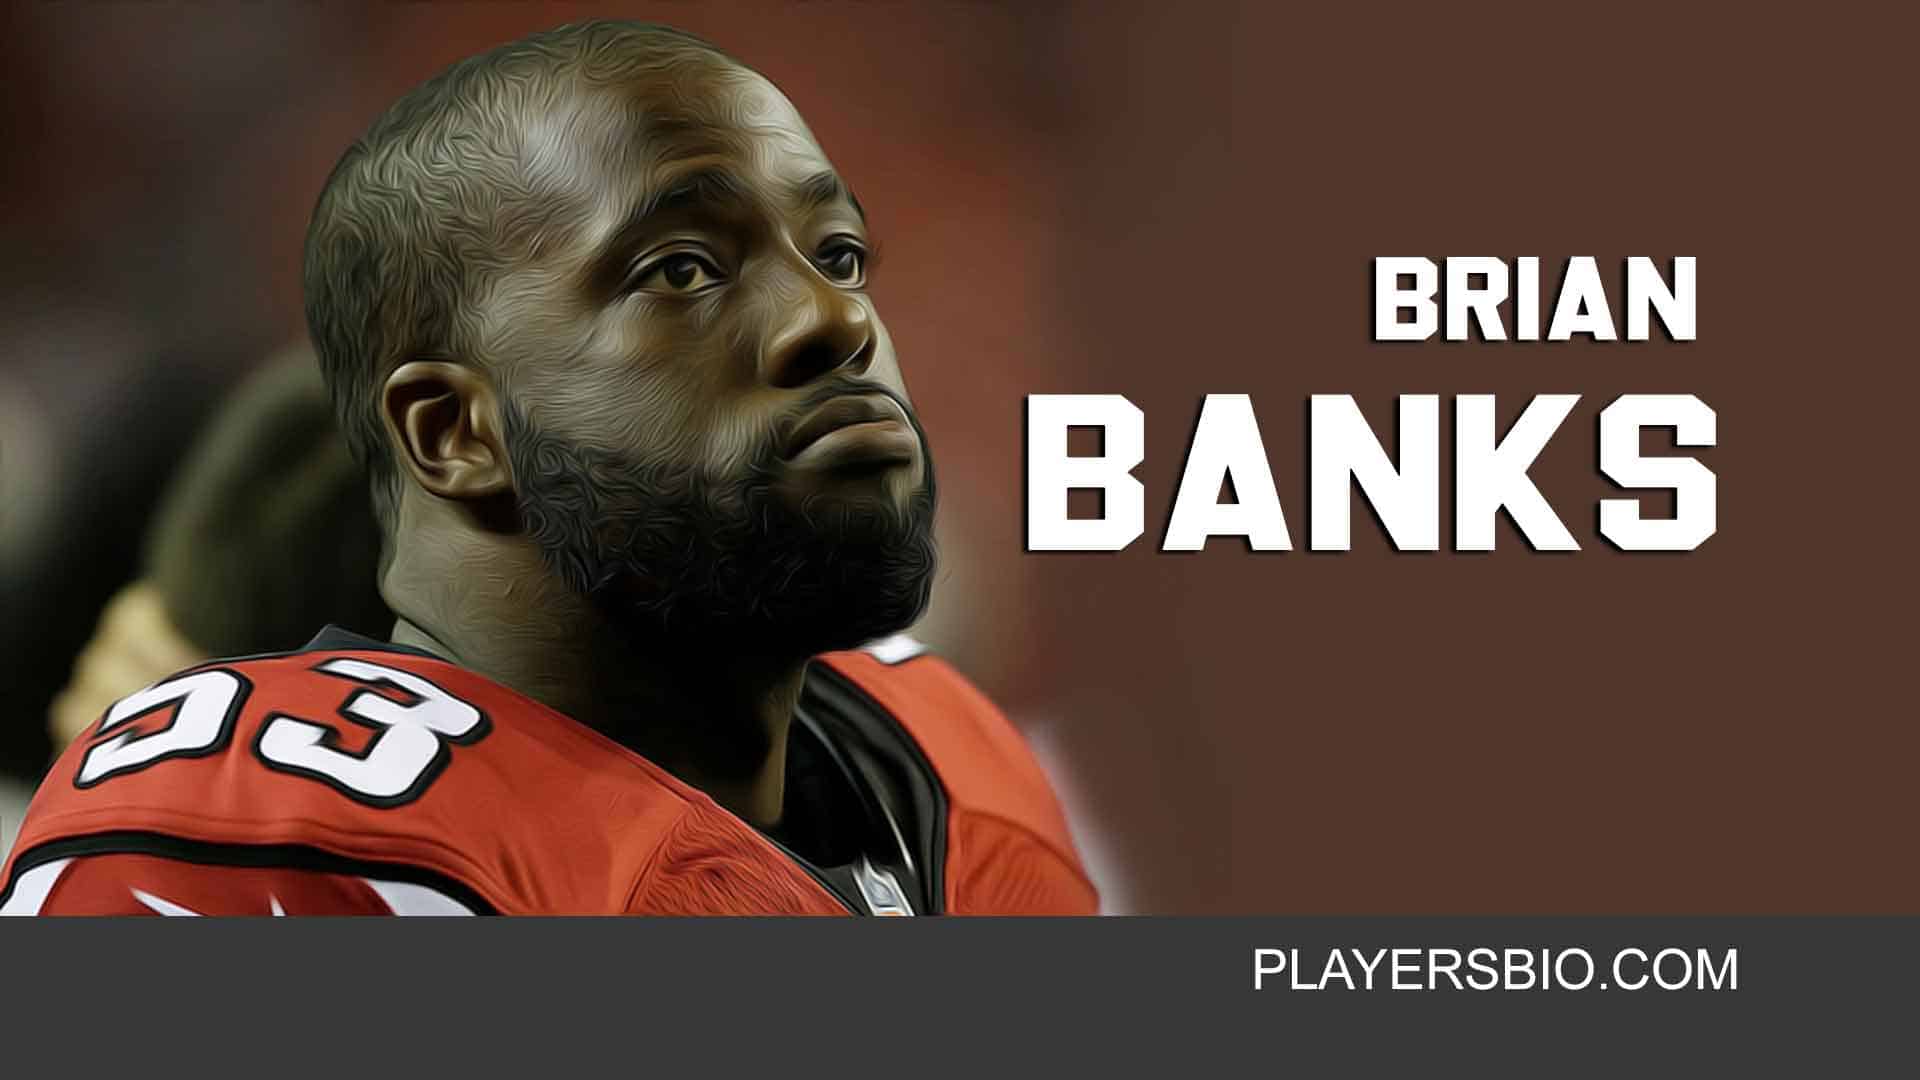 Brian banks quotes